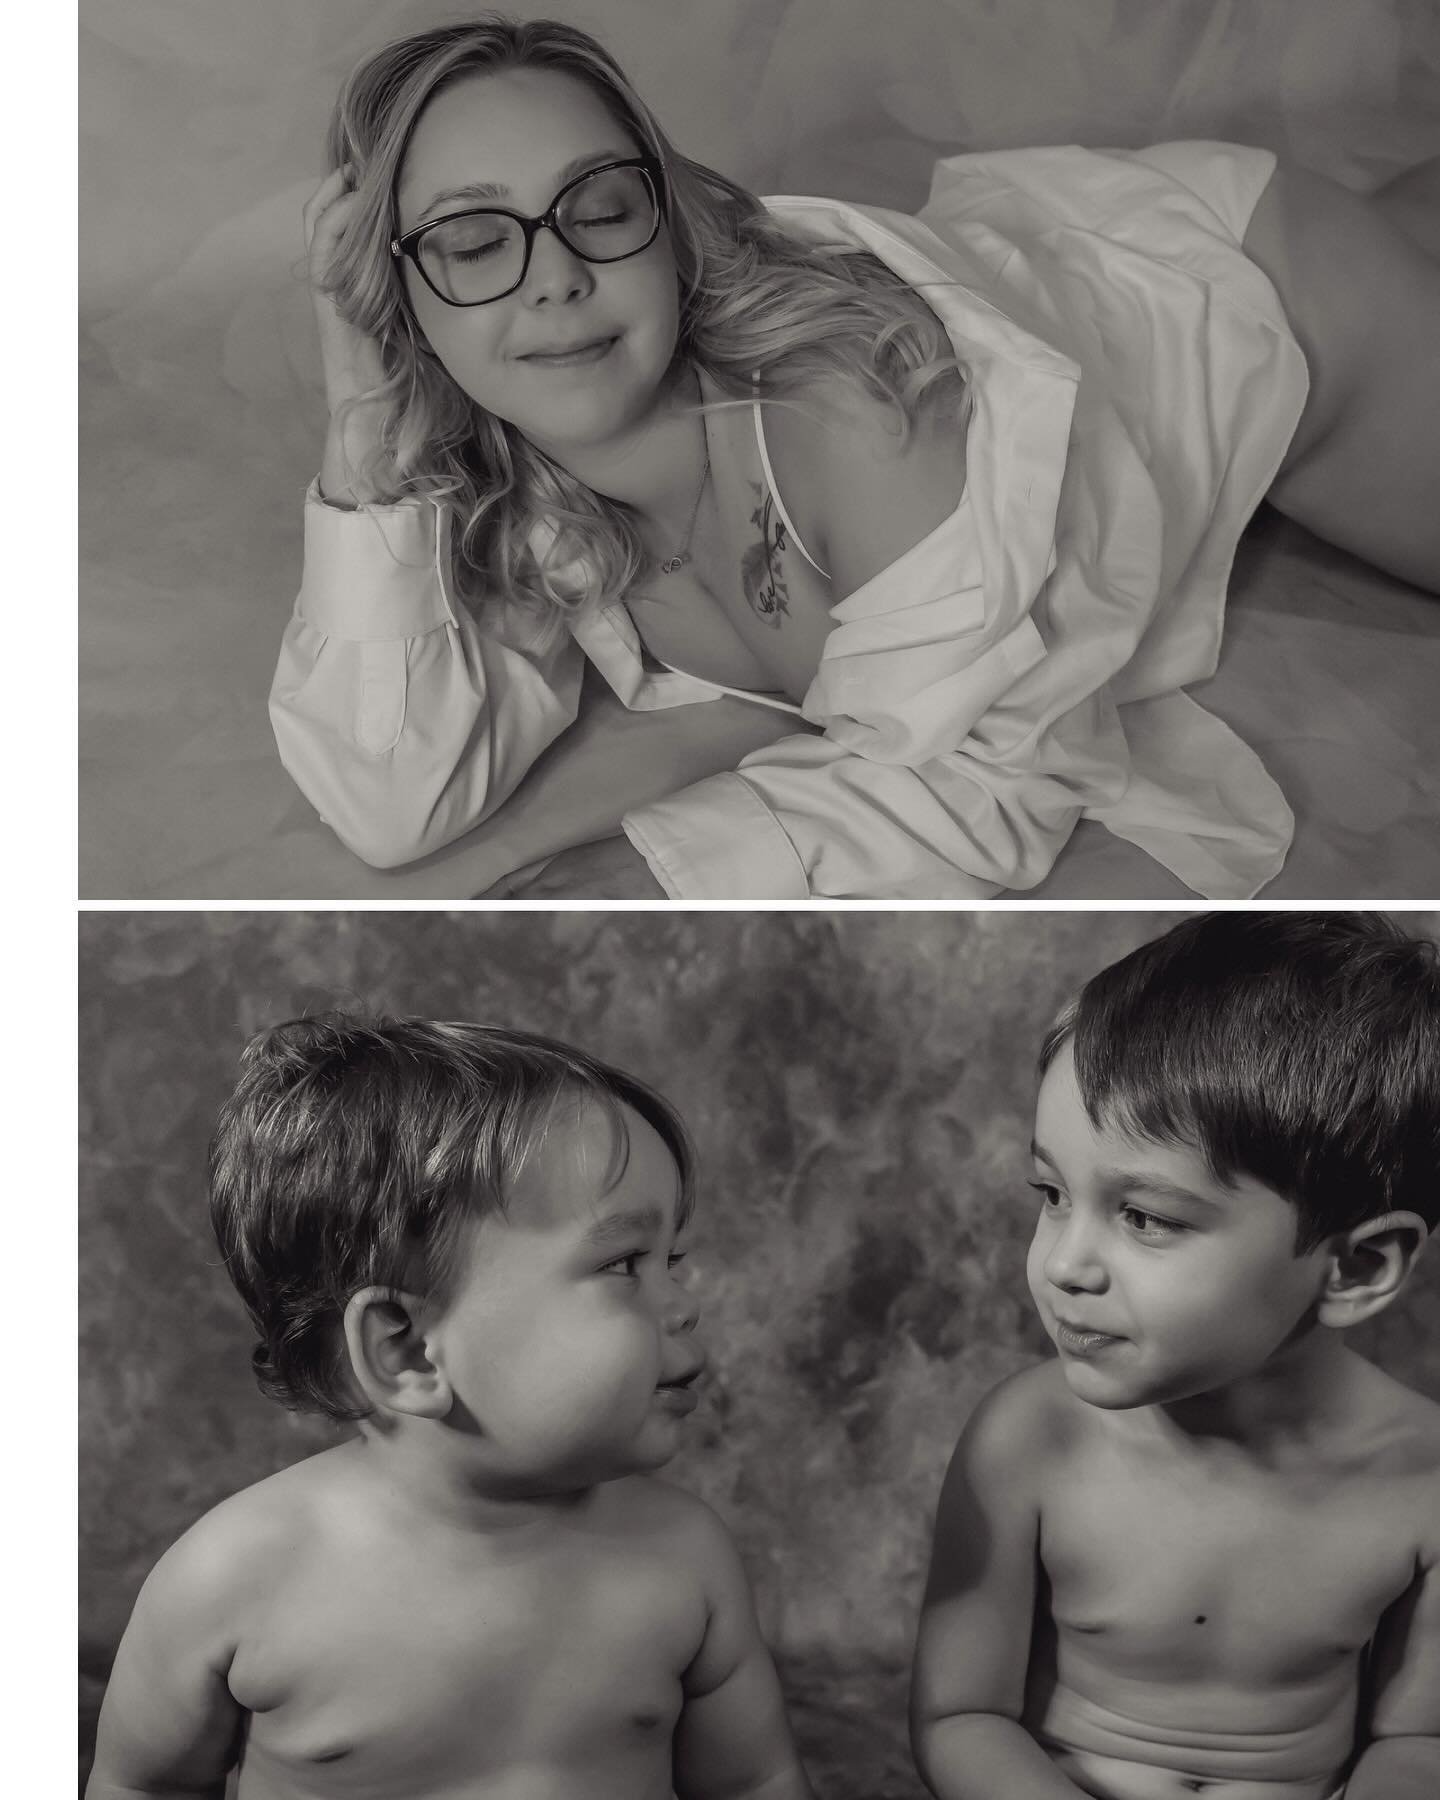 &ldquo;Motherhood: Desperately seeking a break, but not wanting to miss a single moment.&rdquo;
 
___________
 
Loving the shots of these two adorable boys and of course, of mama individually. Kids grow so fast, what a treasure to capture this moment